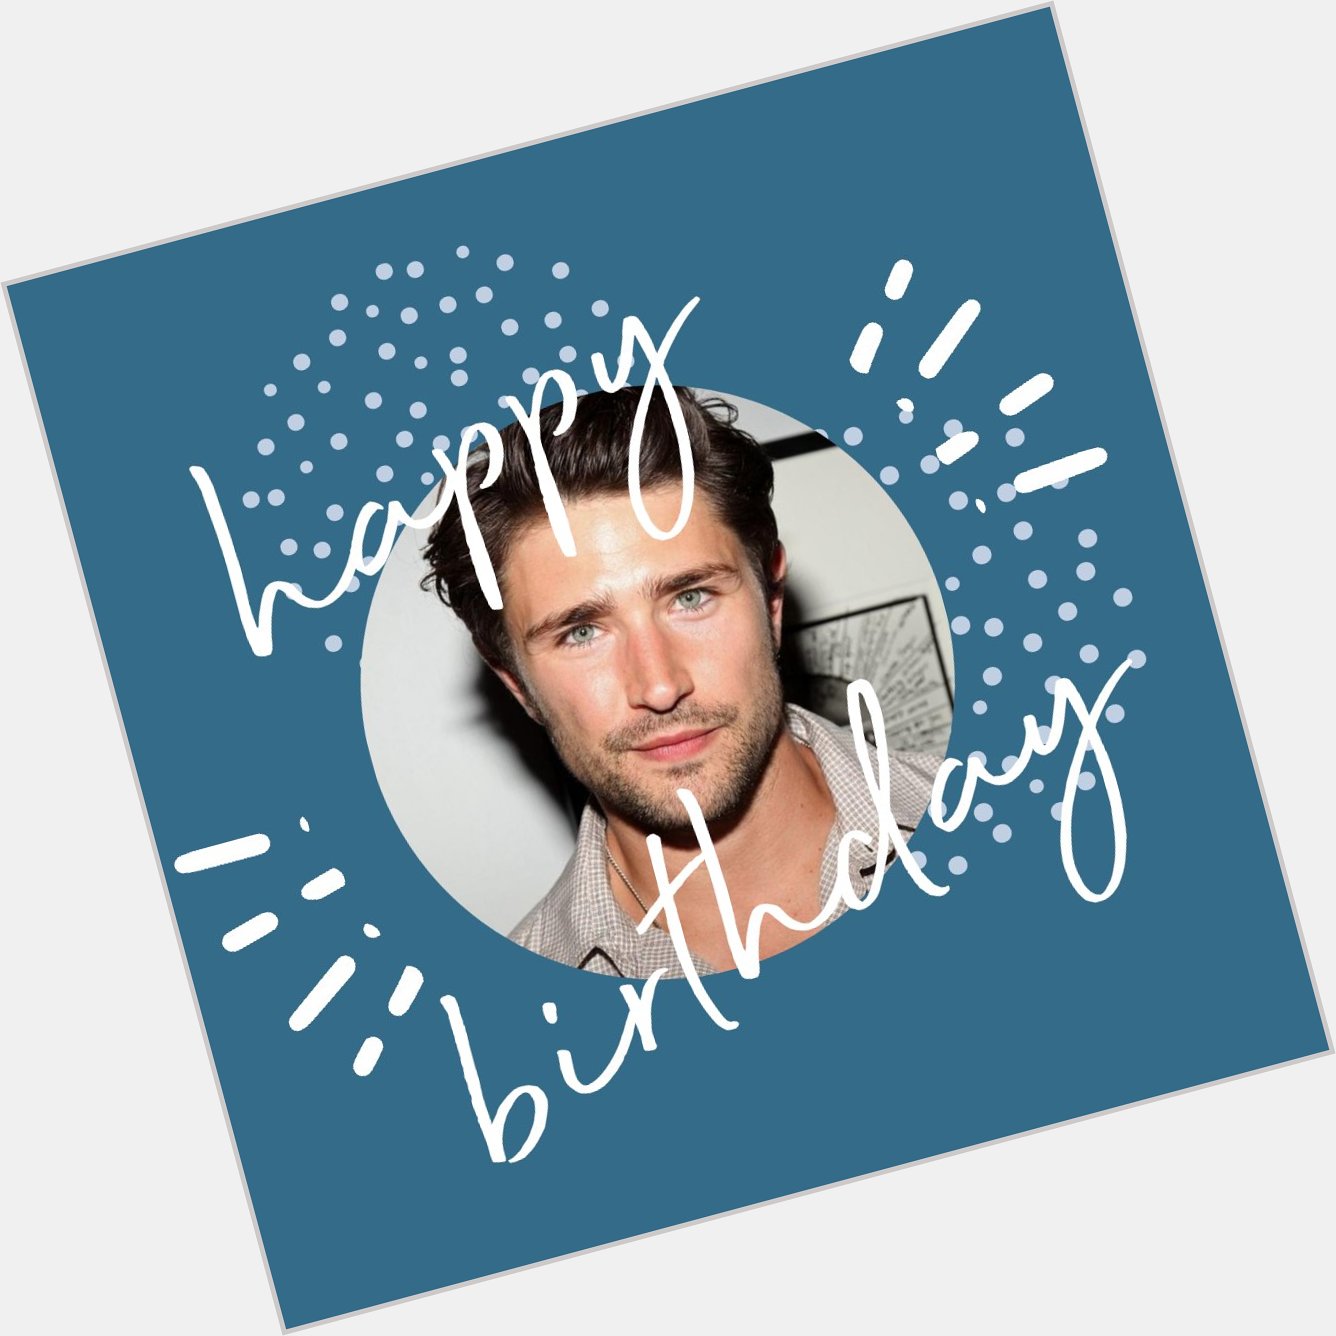 We would like to wish VYT alumni Matt Dallas a HAPPY BIRTHDAY and an amazing year ahead! 